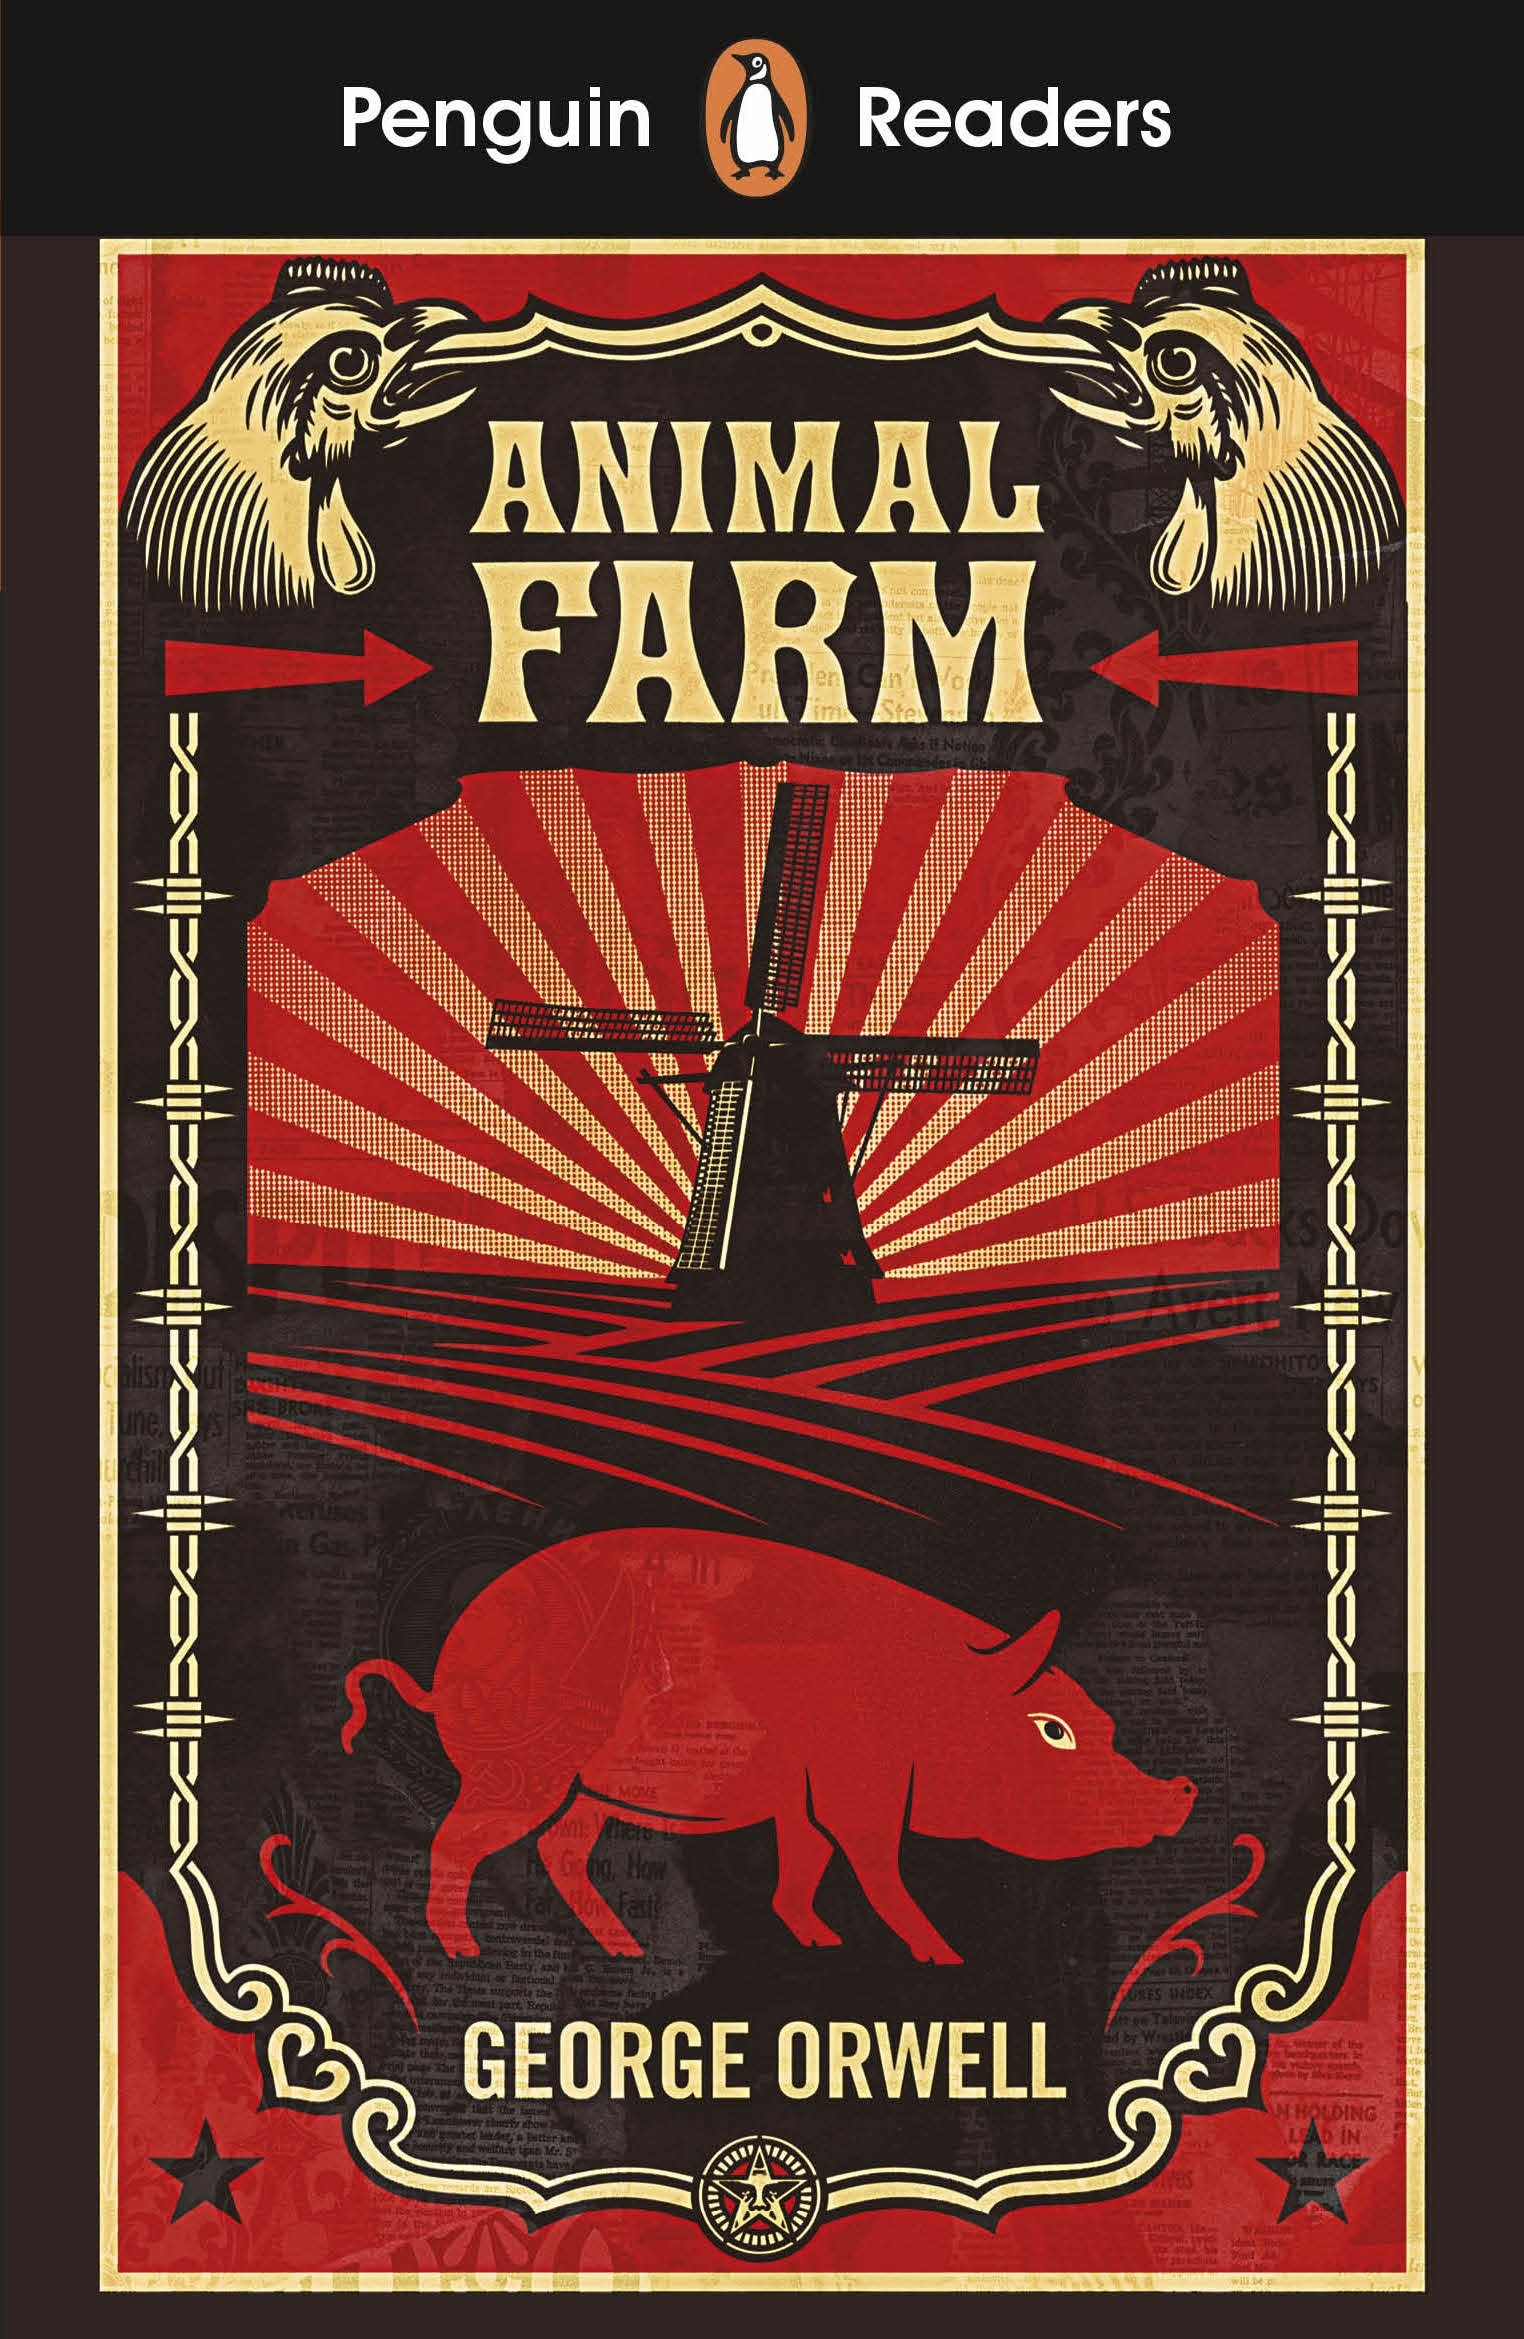 Book “Penguin Readers Level 3: Animal Farm (ELT Graded Reader)” by George Orwell — May 14, 2020